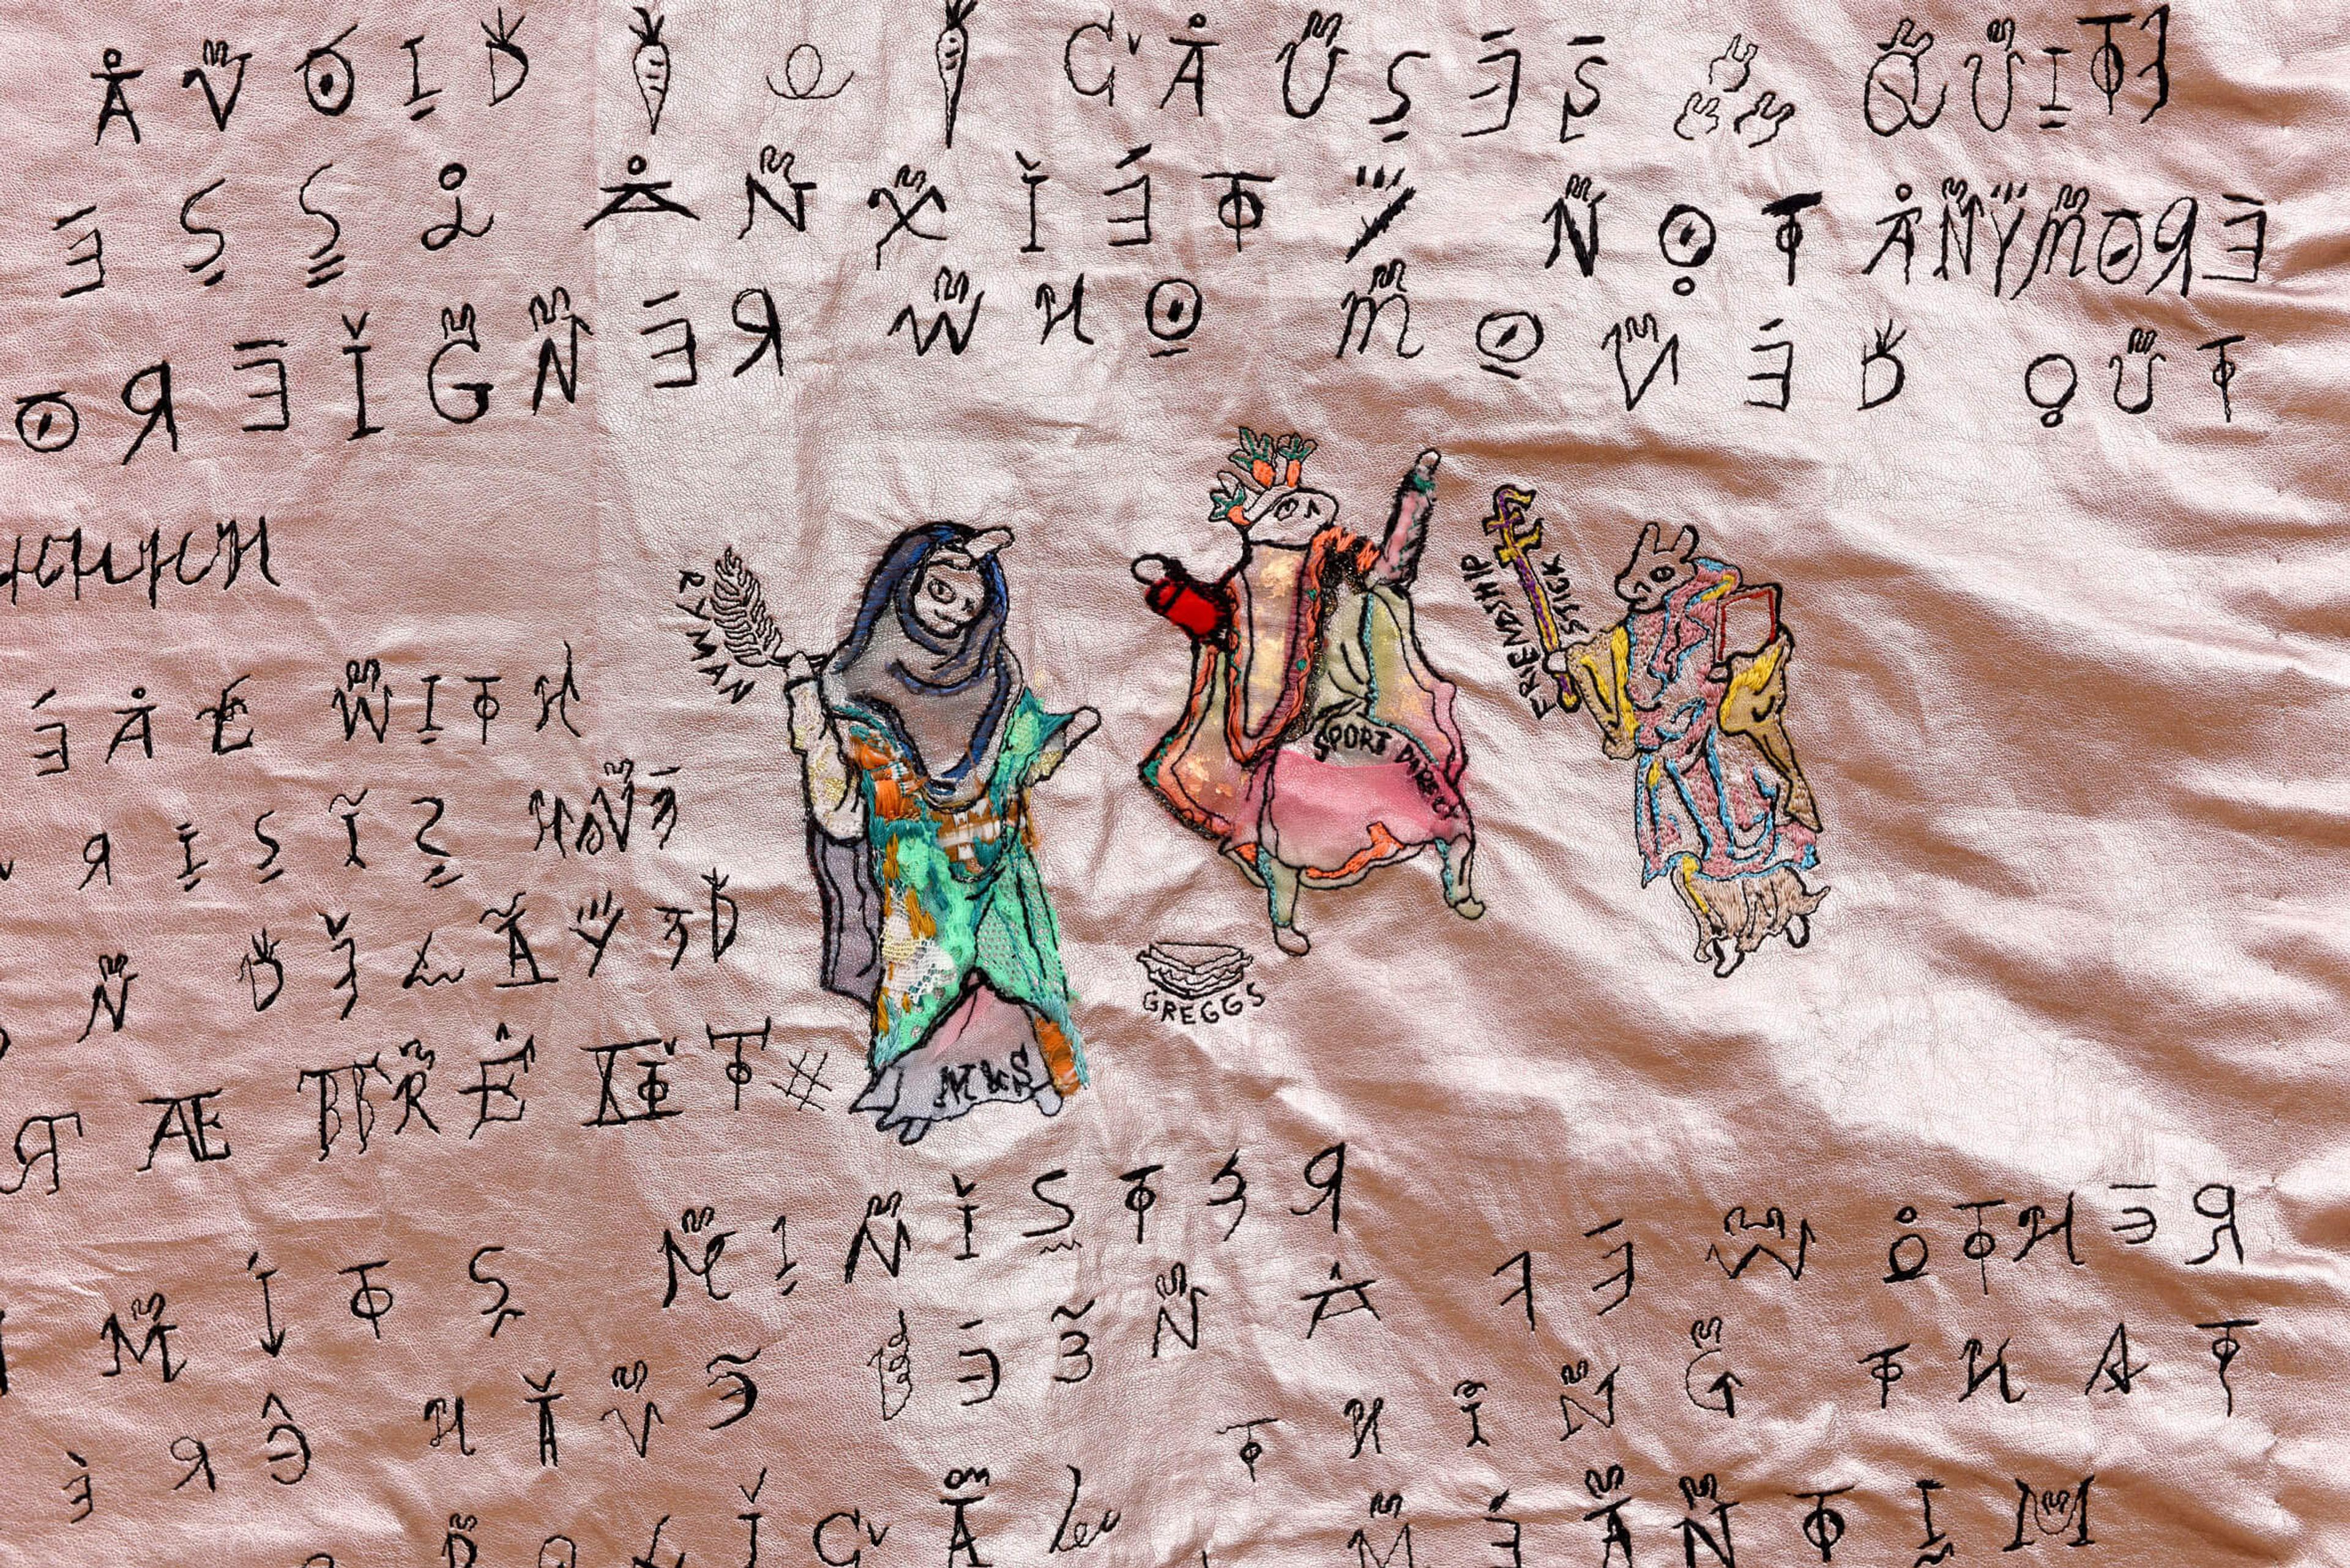 Pink satin fabric embroidered with rabbits dressed in elaborate ceremonial clothes, surrounded by characters from an invented script